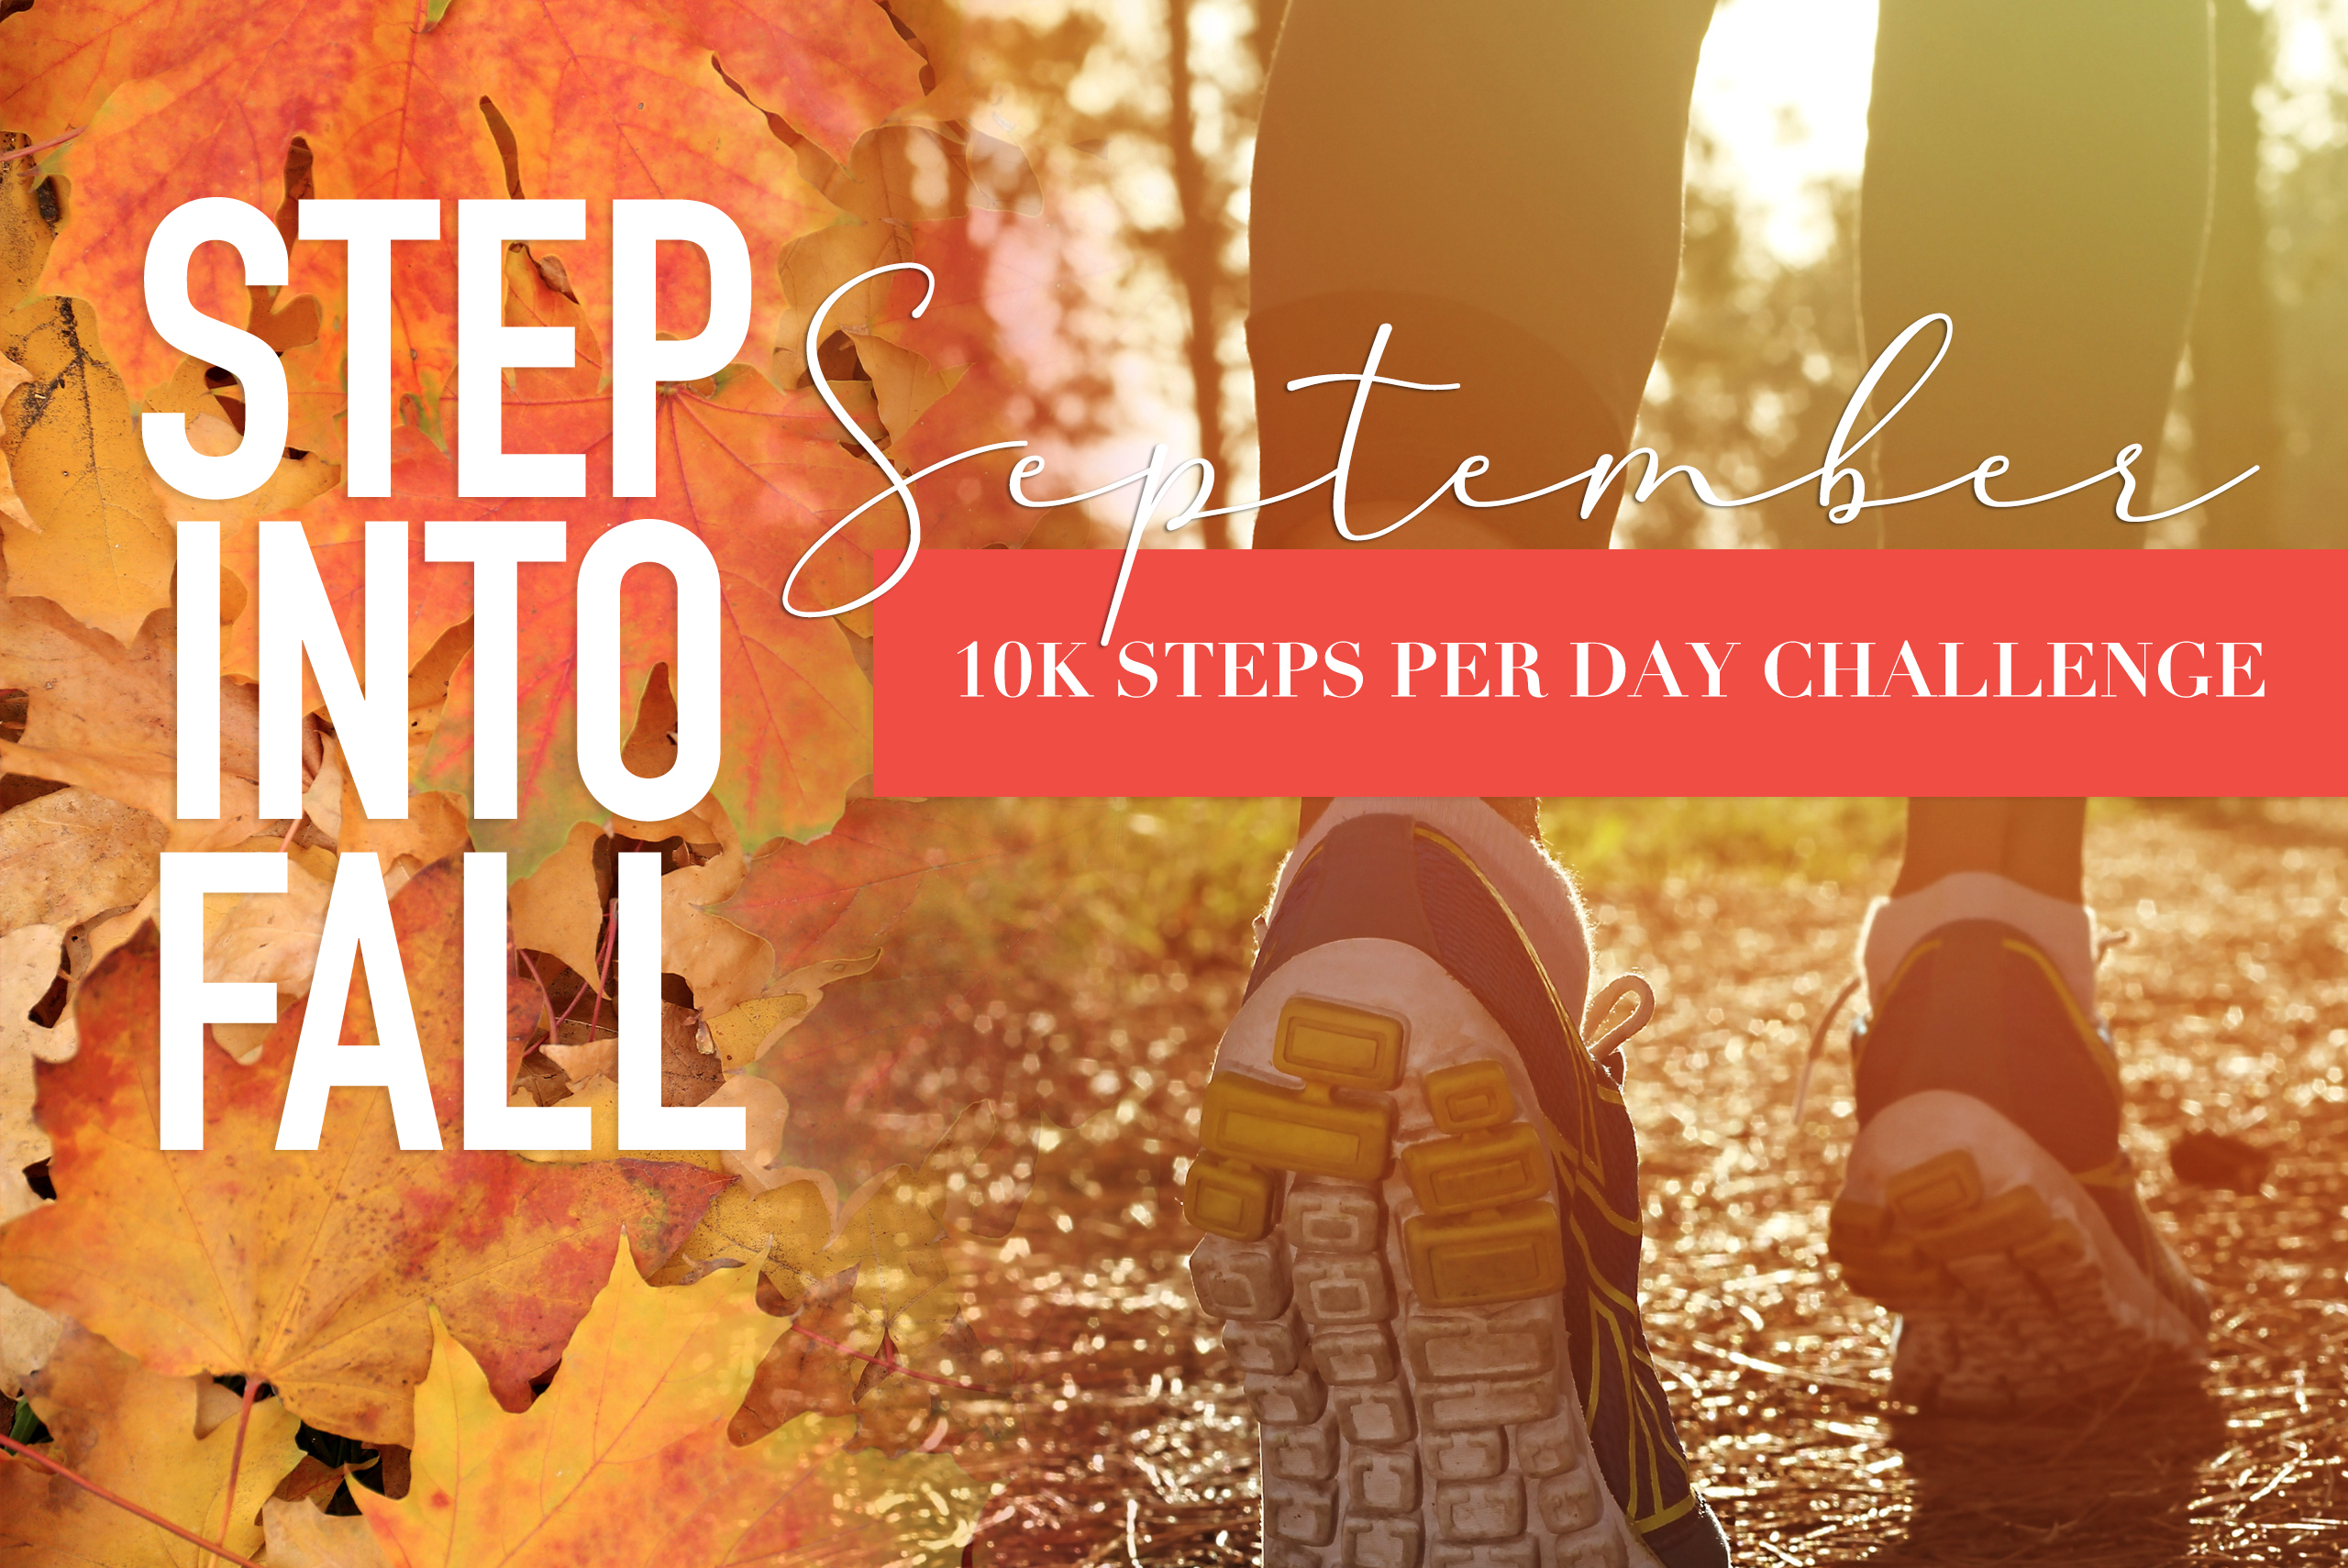 Step Into Fall with HCFO! 10k steps per day Challenge - September 1 through 30.